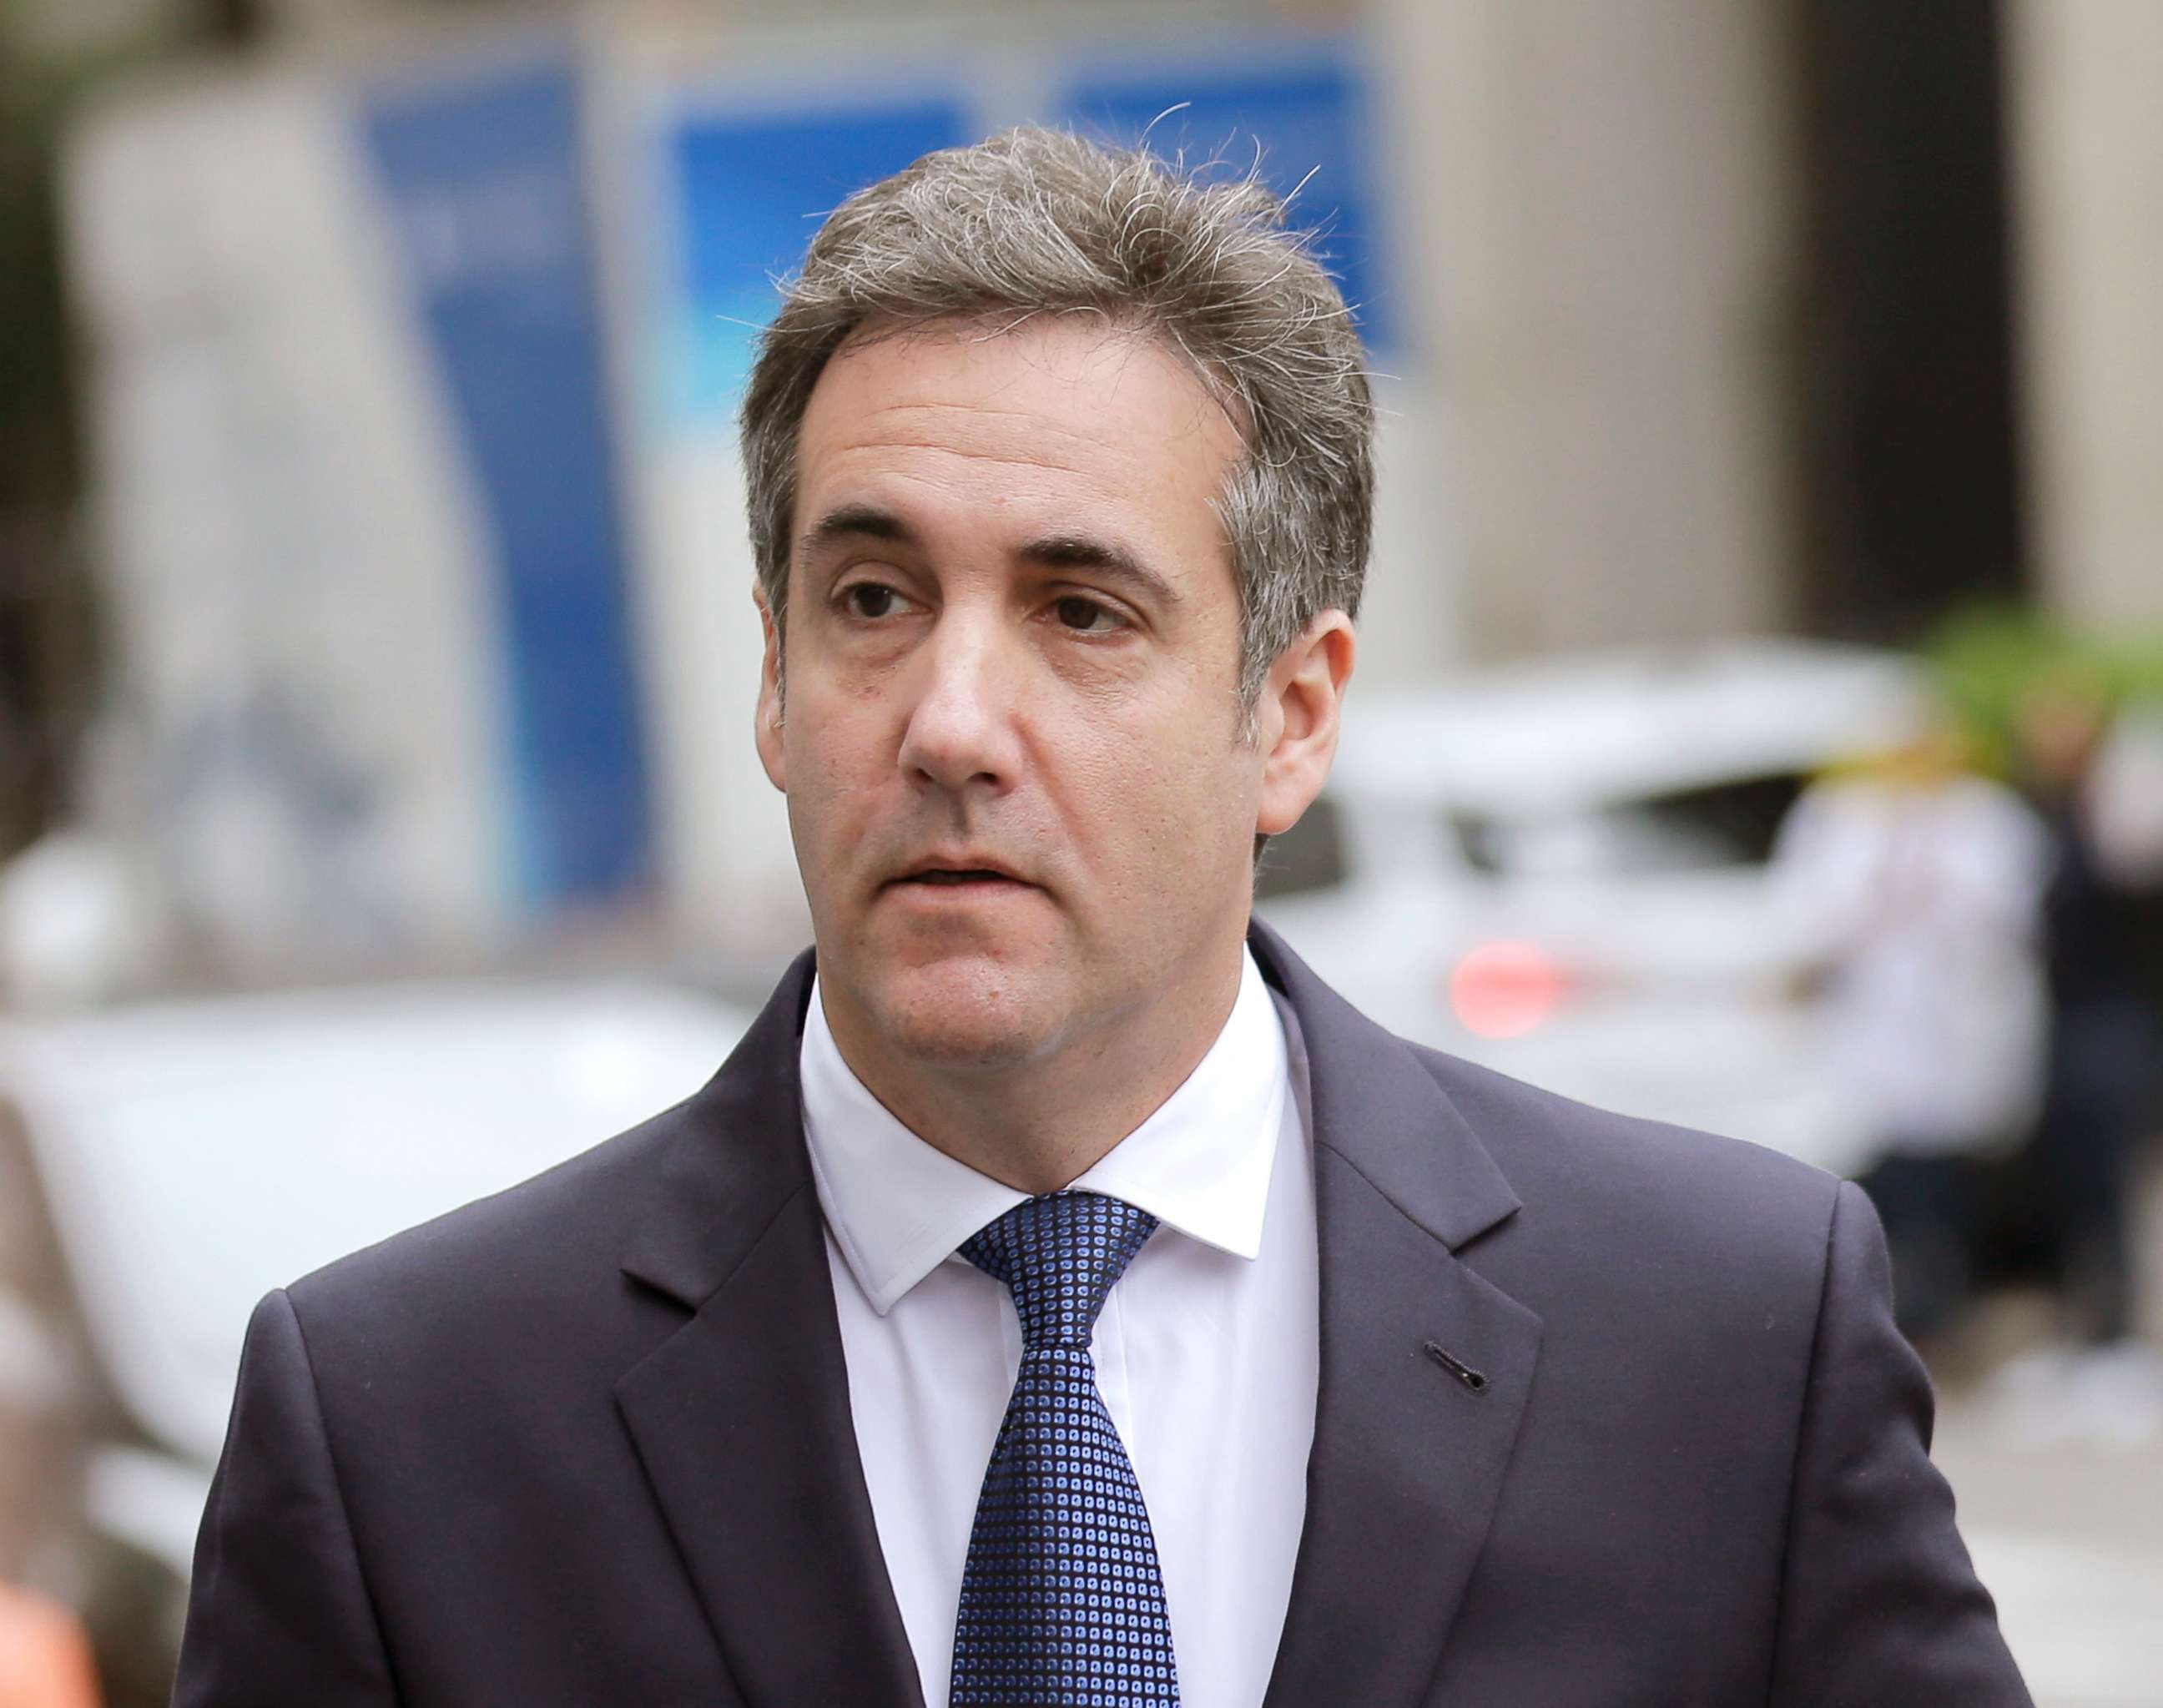 PHOTO: Michael Cohen arrives to court in New York on May 30, 2018.